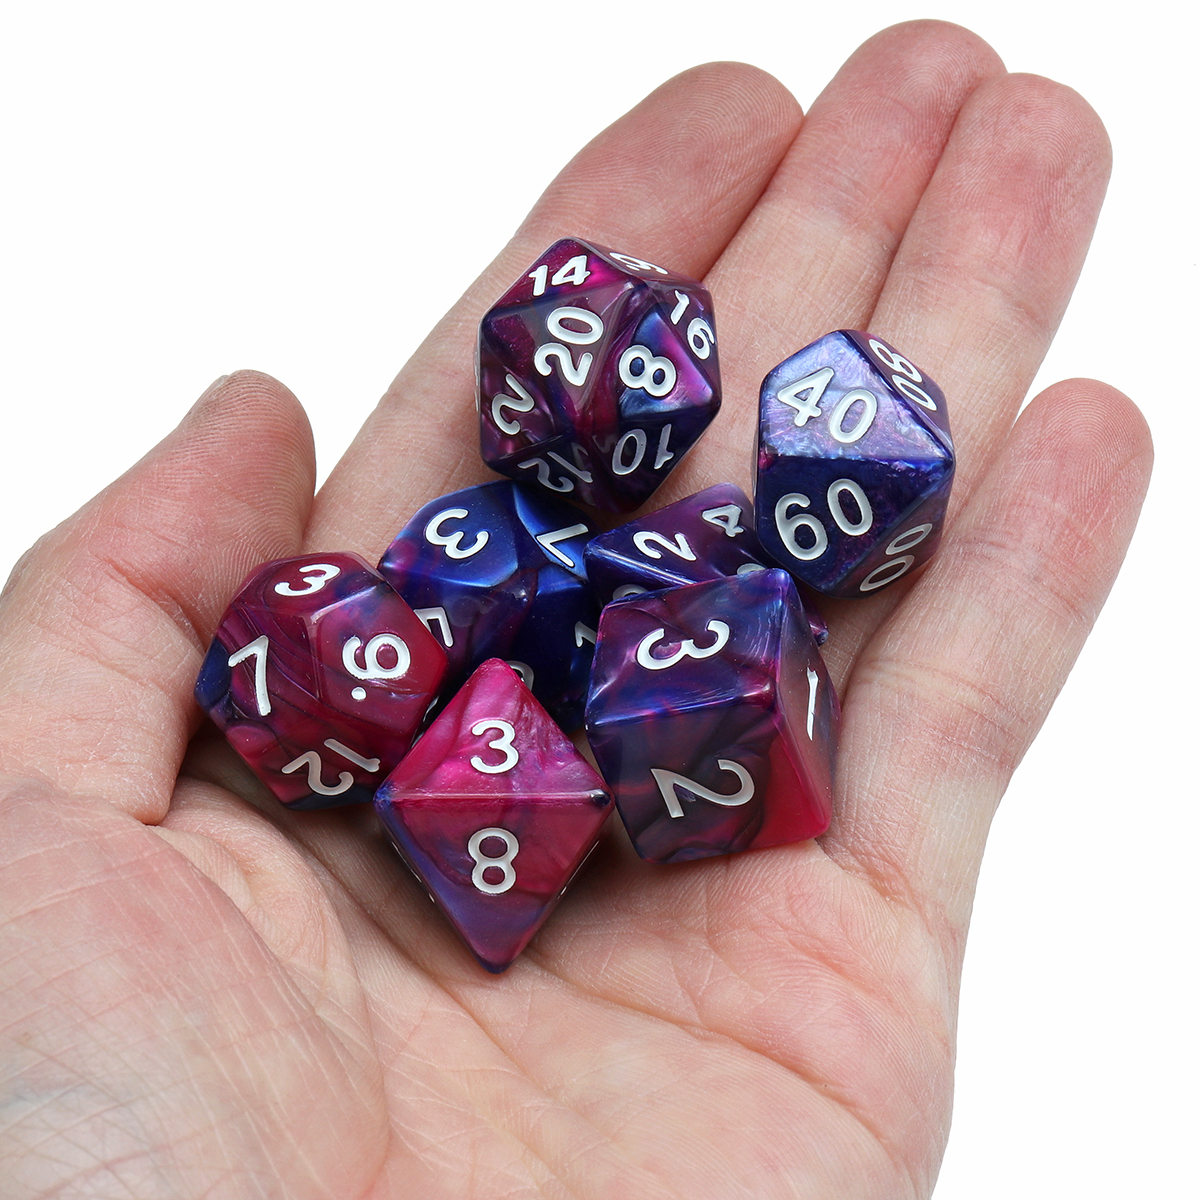 495670Pcs-Polyhedral-Dices-for-Dungeons--Dragons-Desktop-Games-With-Storage-Bags-1646830-7